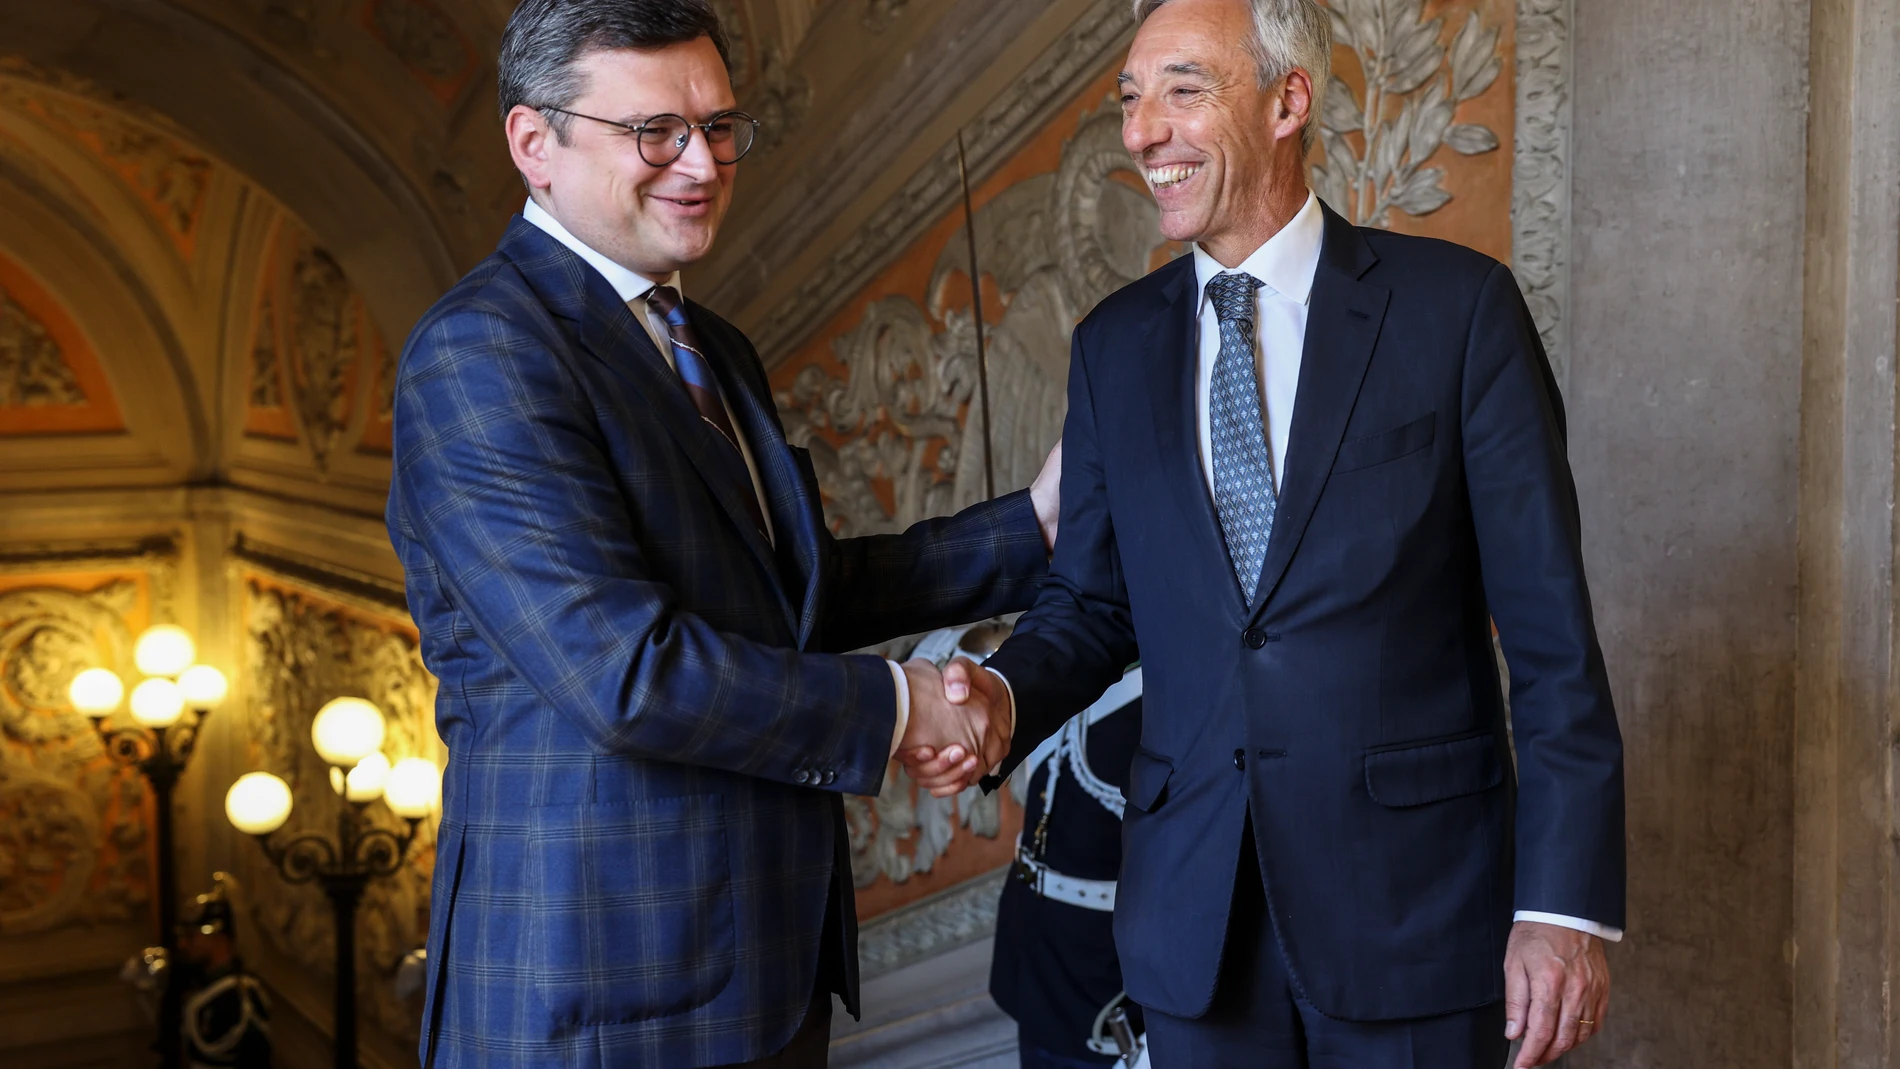 Lisbon (Portugal), 19/05/2023.- Portuguese Foreign Affairs Minister Joao Gomes Cravinho (R) welcomes his Ukrainian counterpart Dmytro Kuleba (L), during their meeting at the Necessidades Palace in Lisbon, Portugal 19 May 2023. Kuleba is on a working visit to Portugal. (Ucrania, Lisboa) EFE/EPA/MIGUEL A. LOPES 